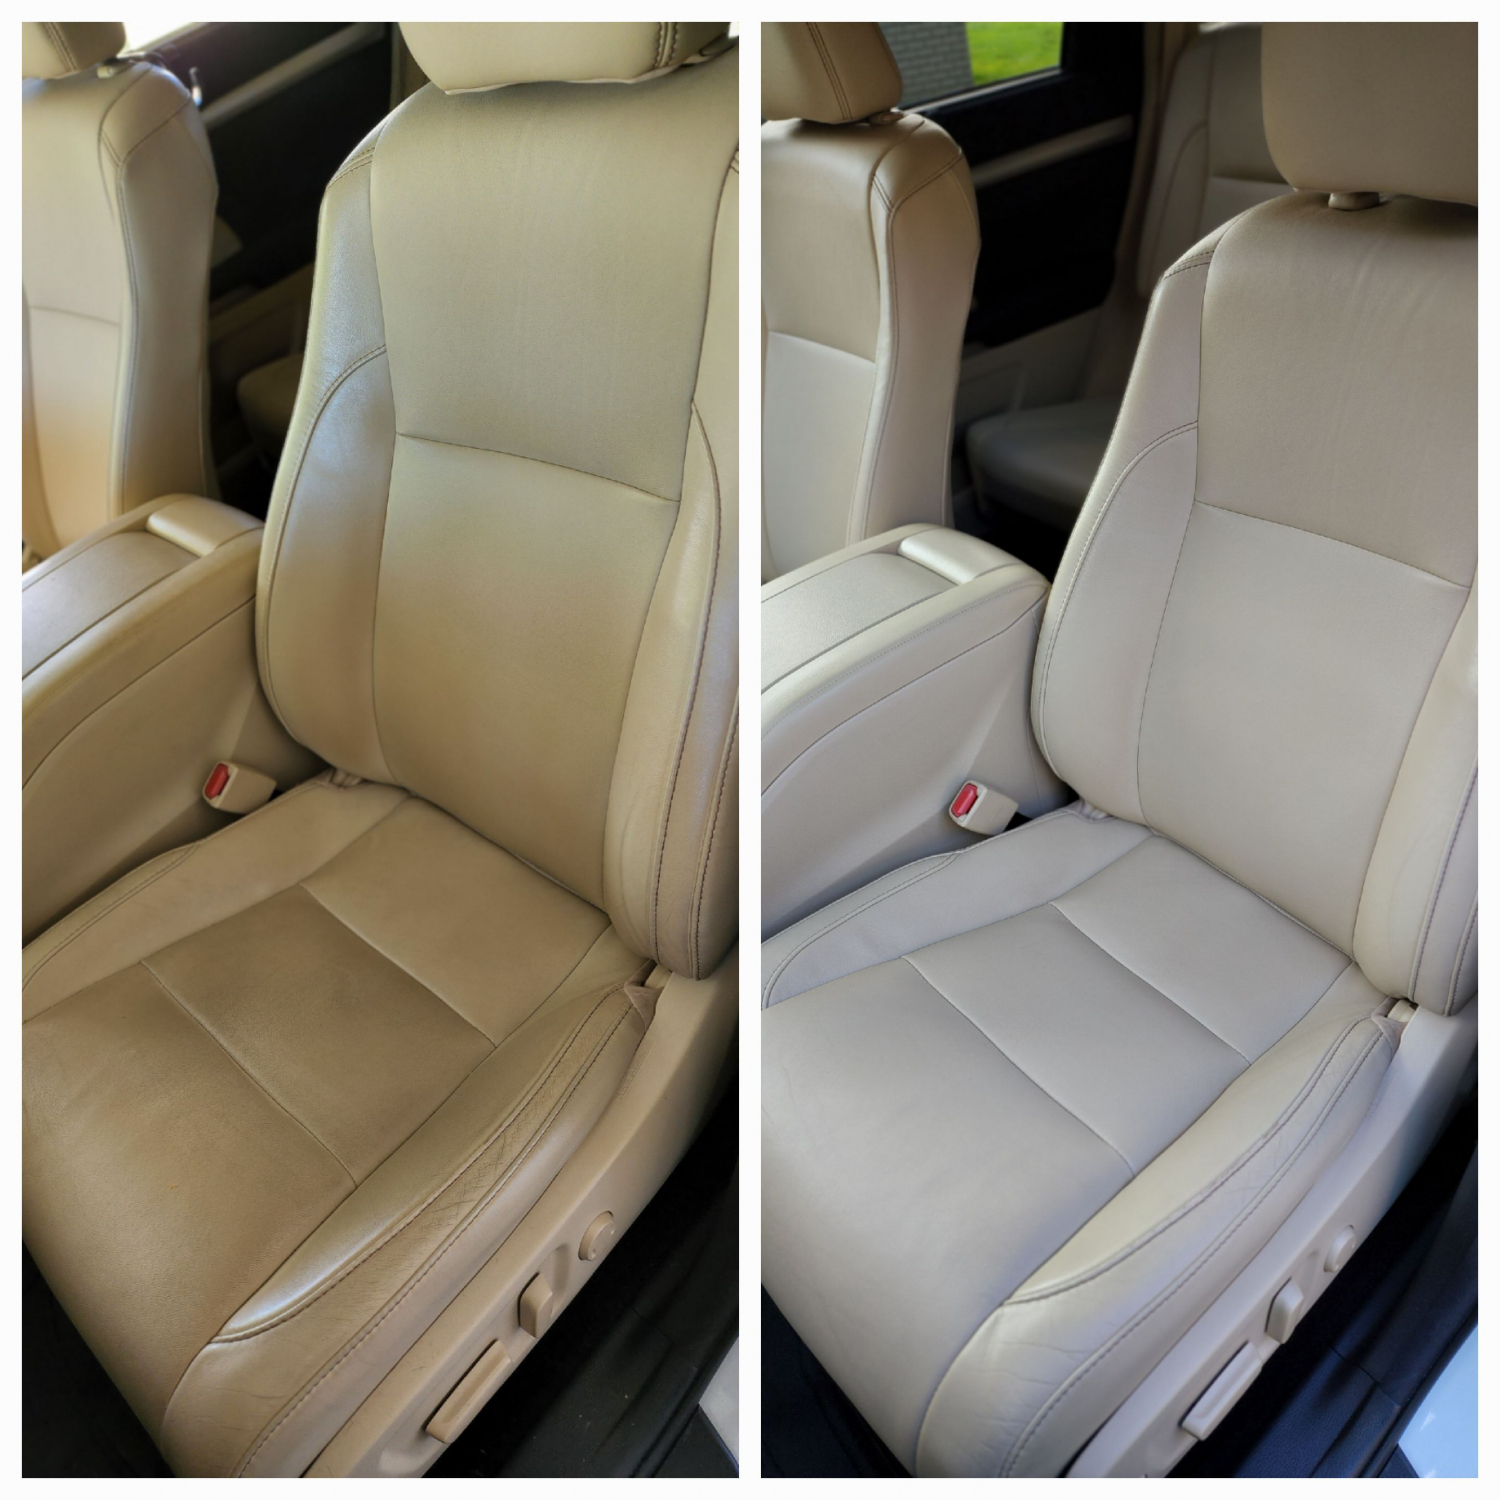 Meguiars D180 Leather Cleaner & Conditioner, leather care, leather  conditioner, leather protectant